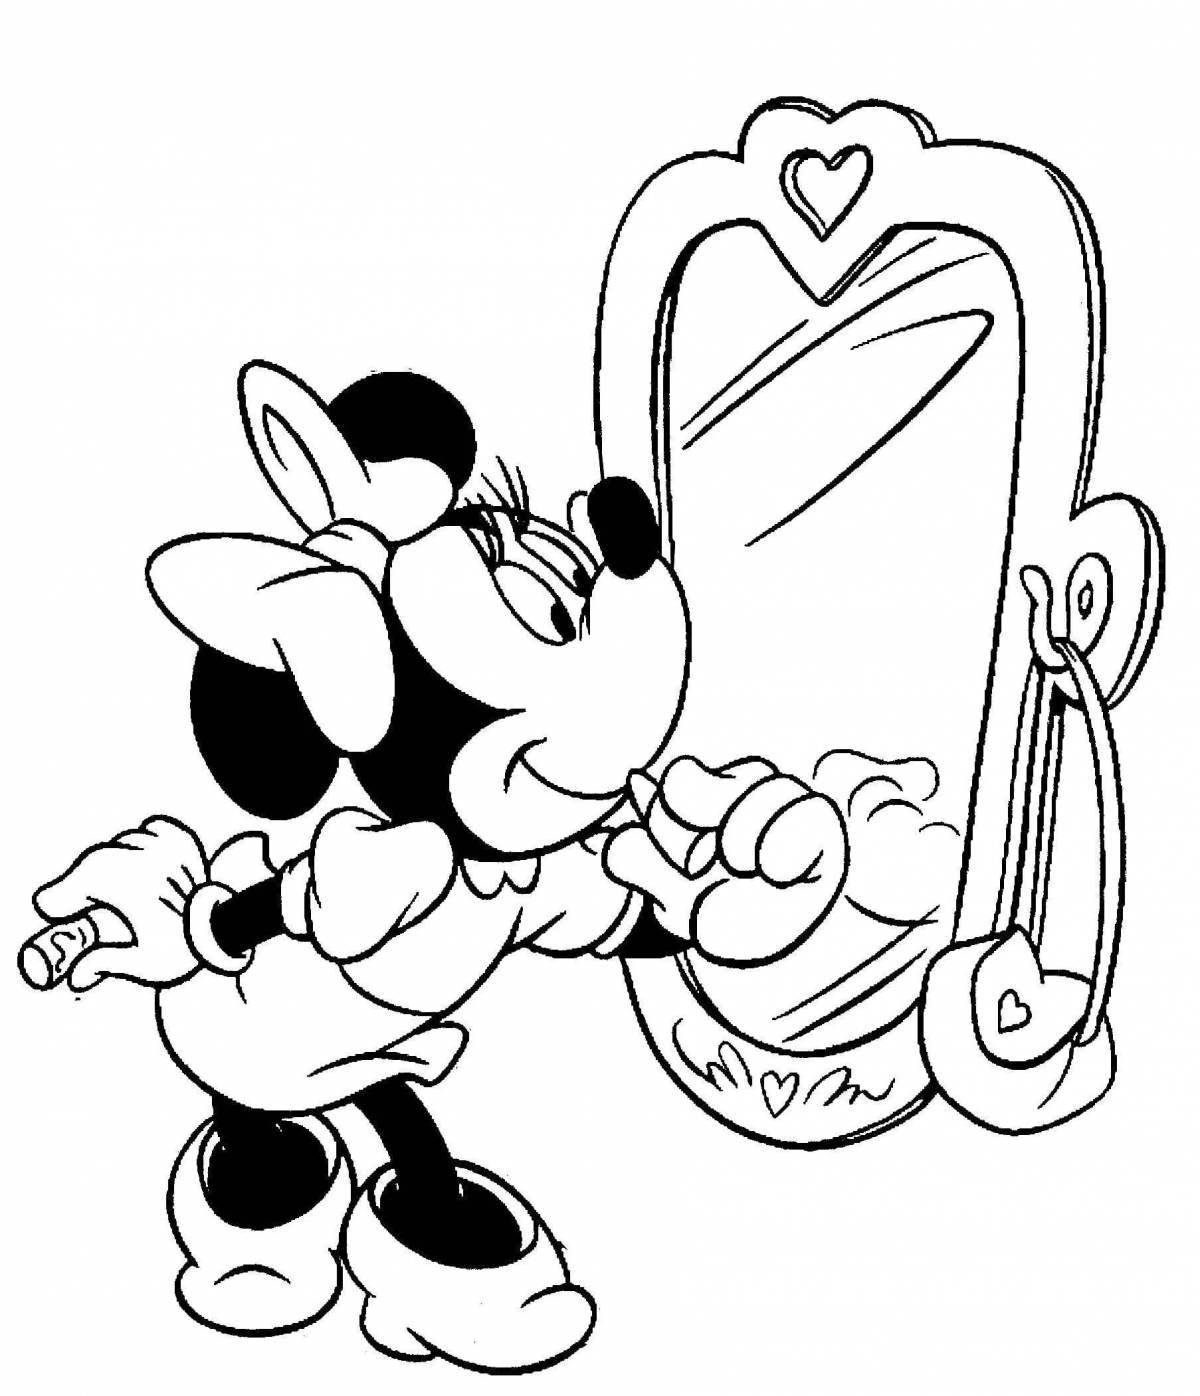 Mickey mouse live coloring